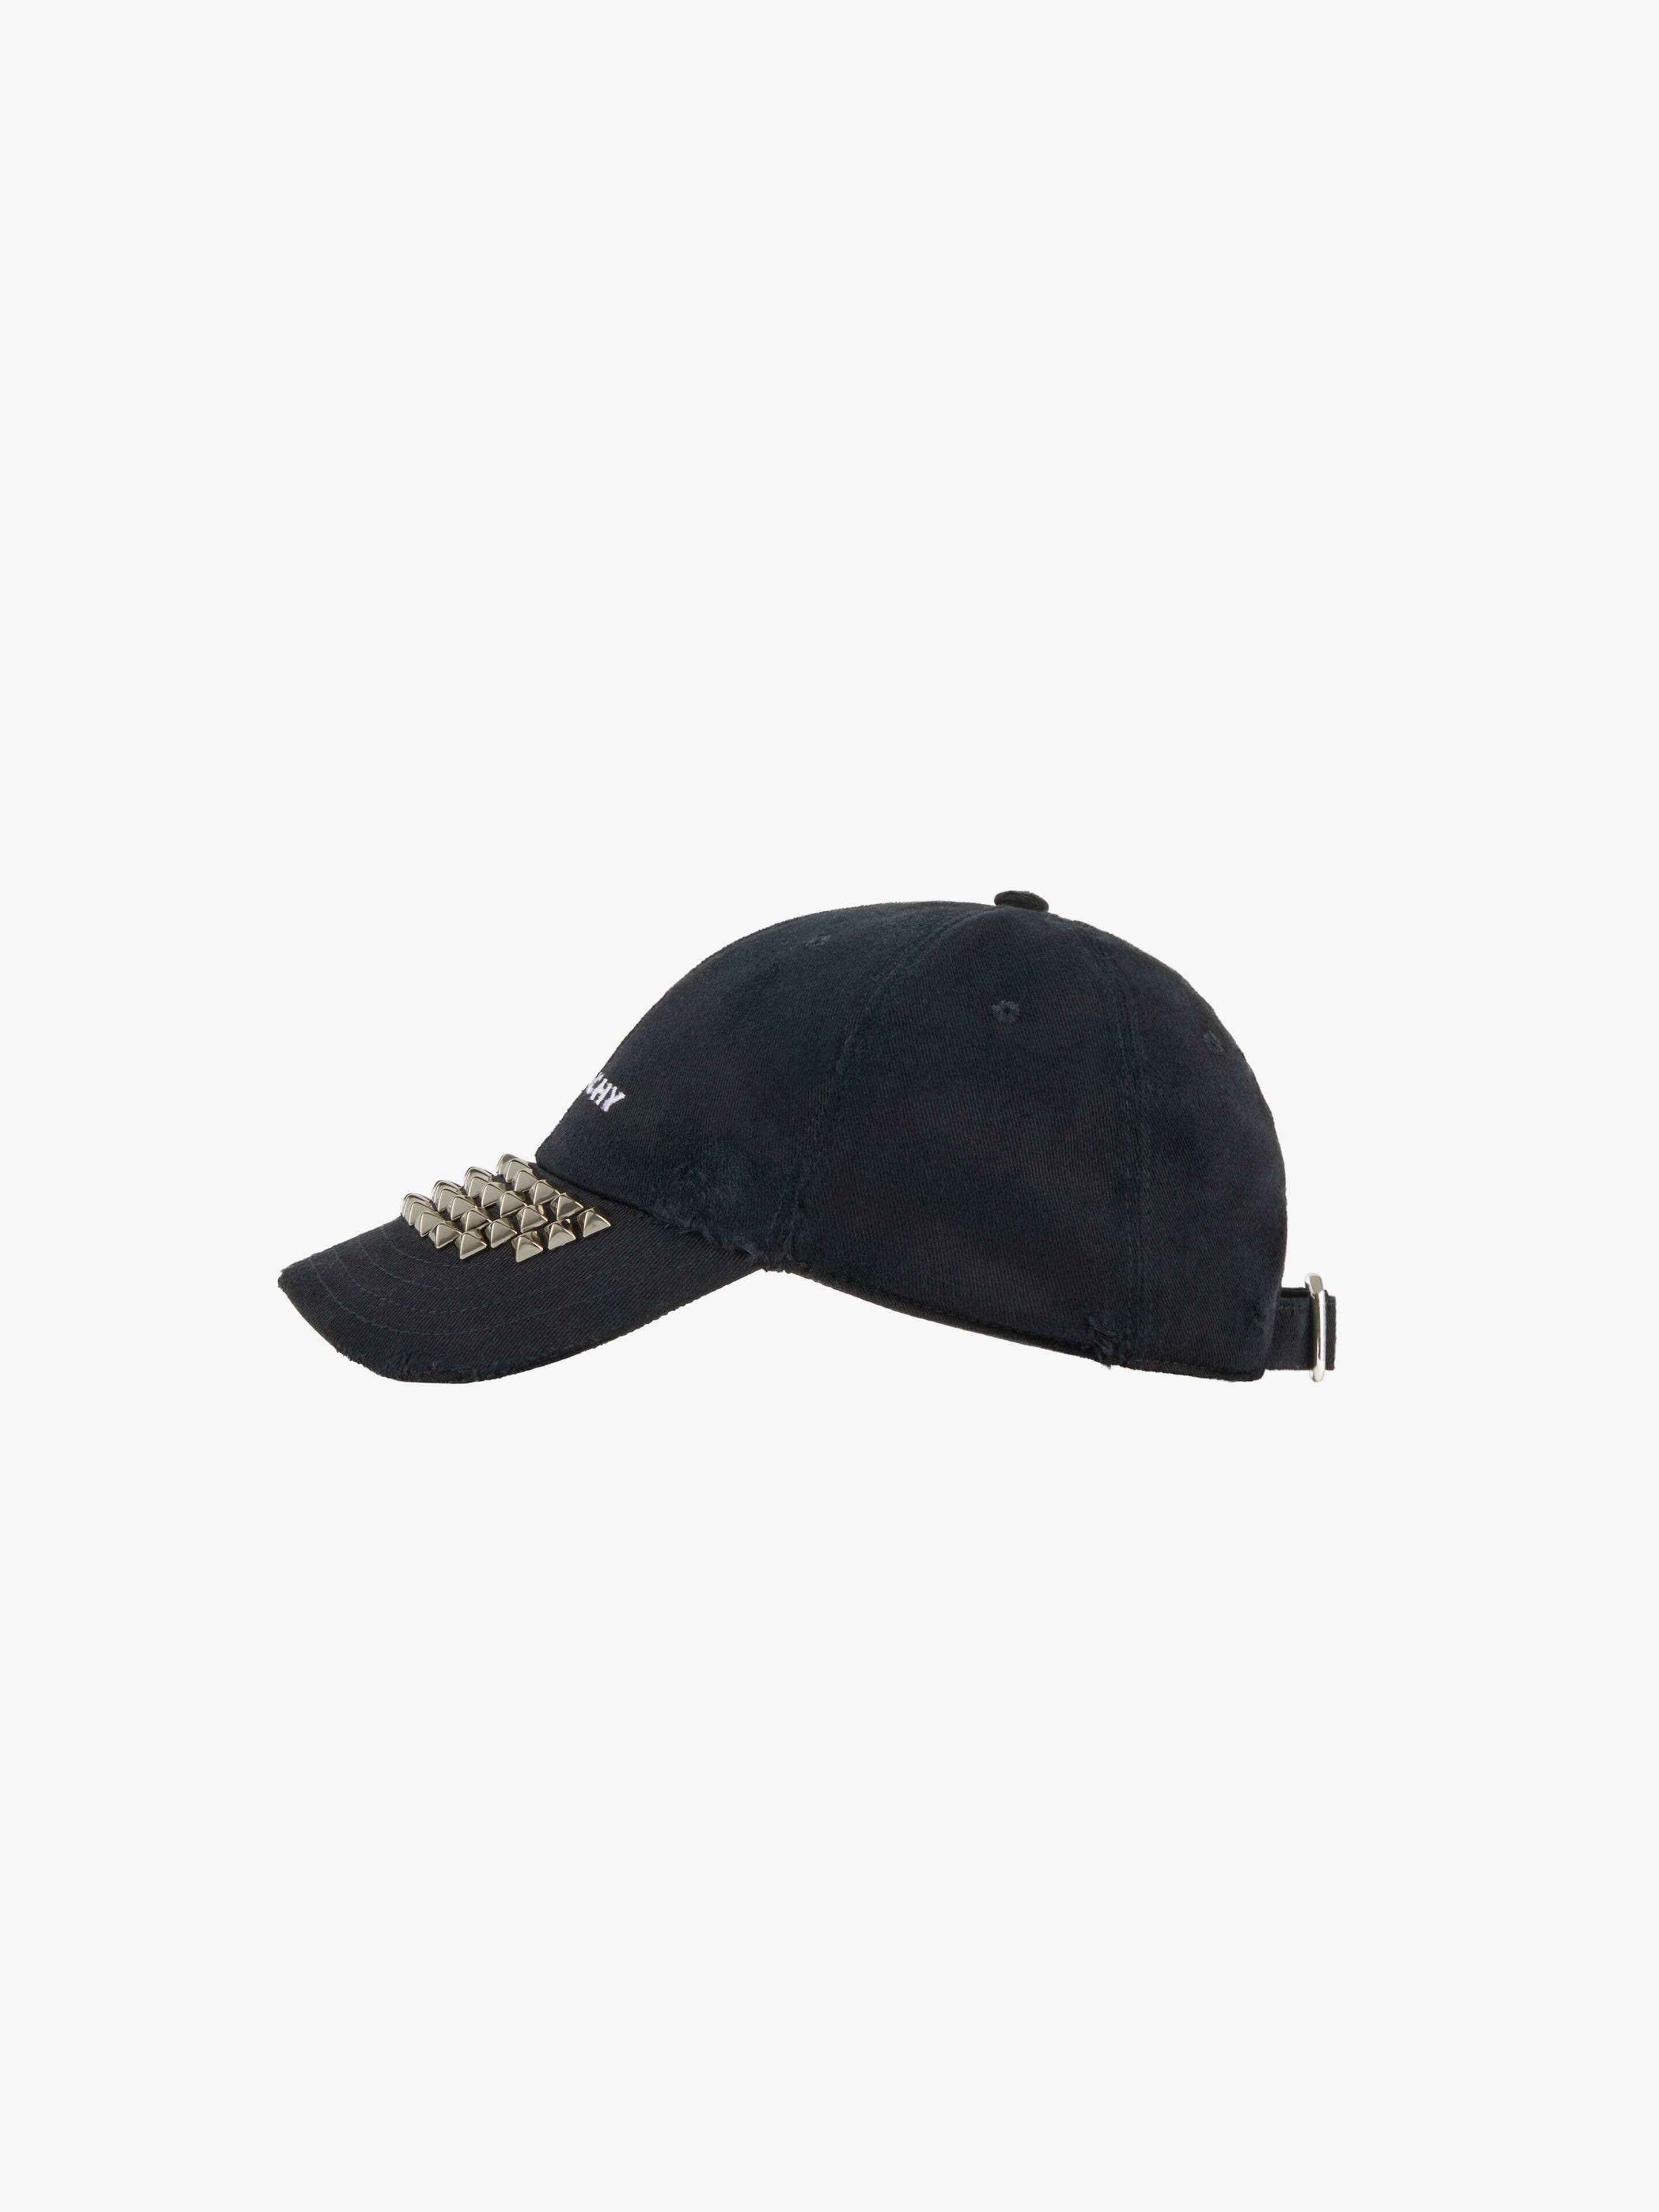 GIVENCHY CAP IN RIPPED & REPAIRED COTTON WITH STUDS - 4